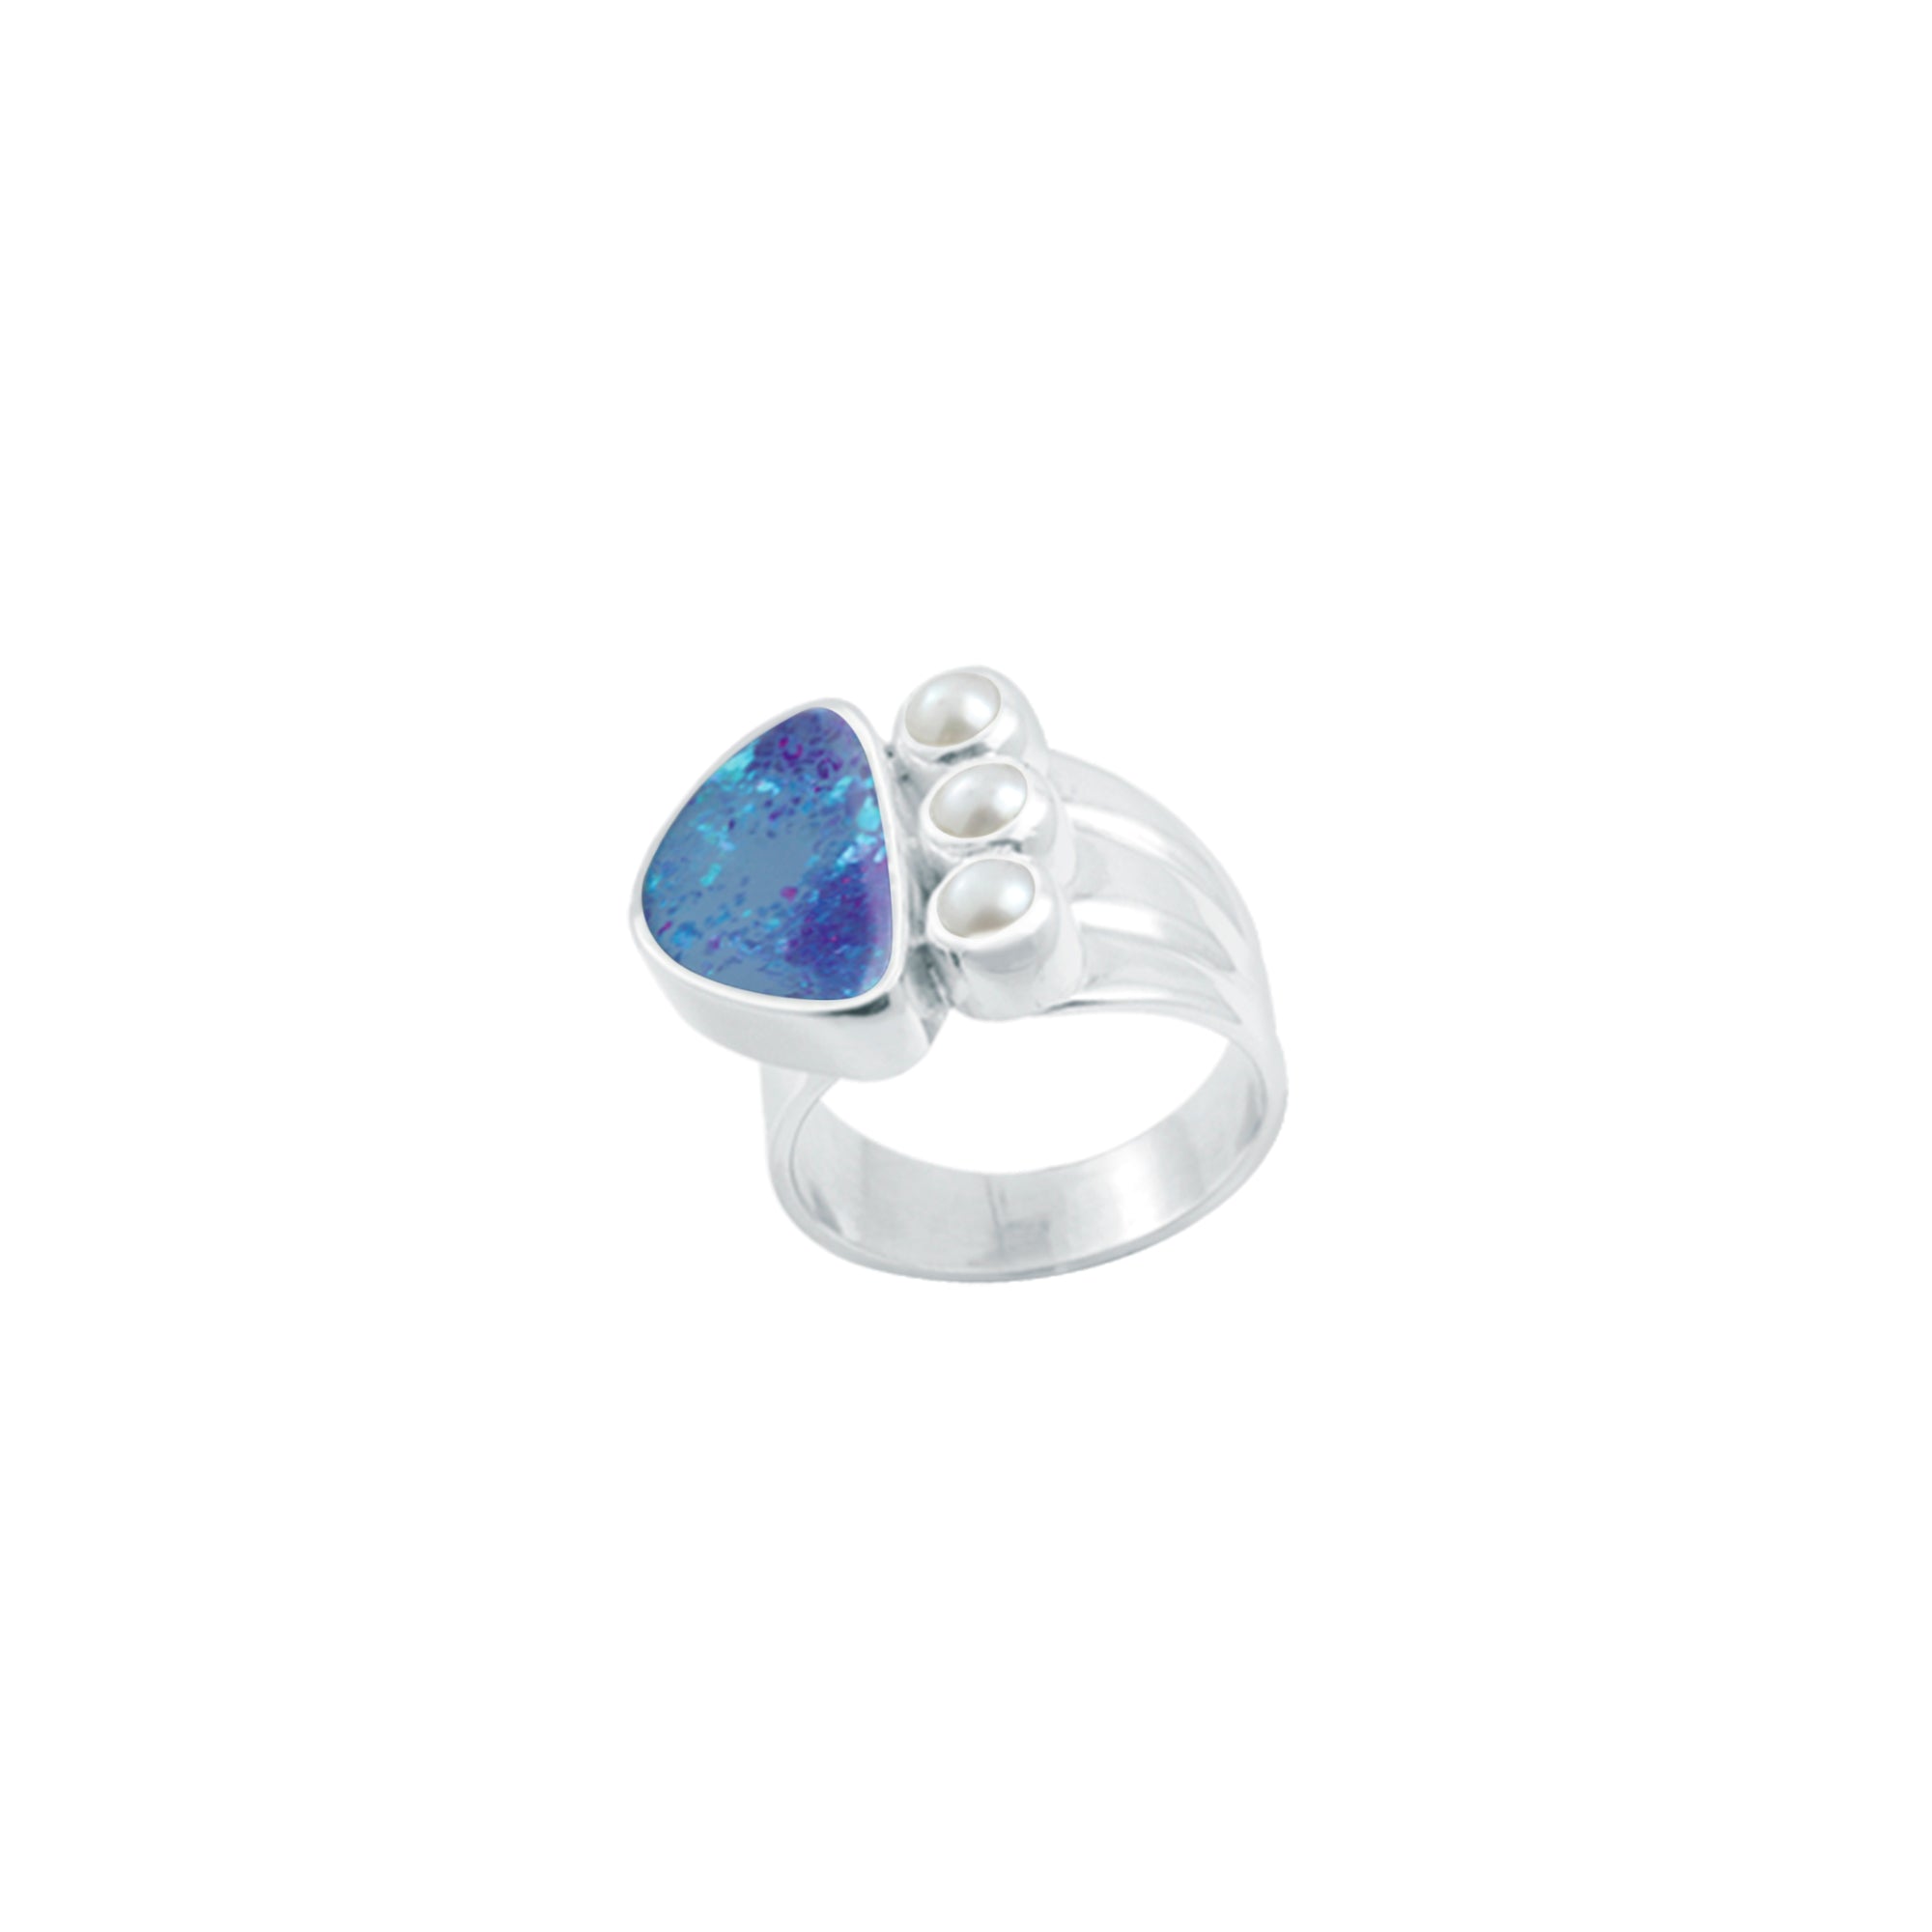 Gorgeous Opal & Pearl Ring